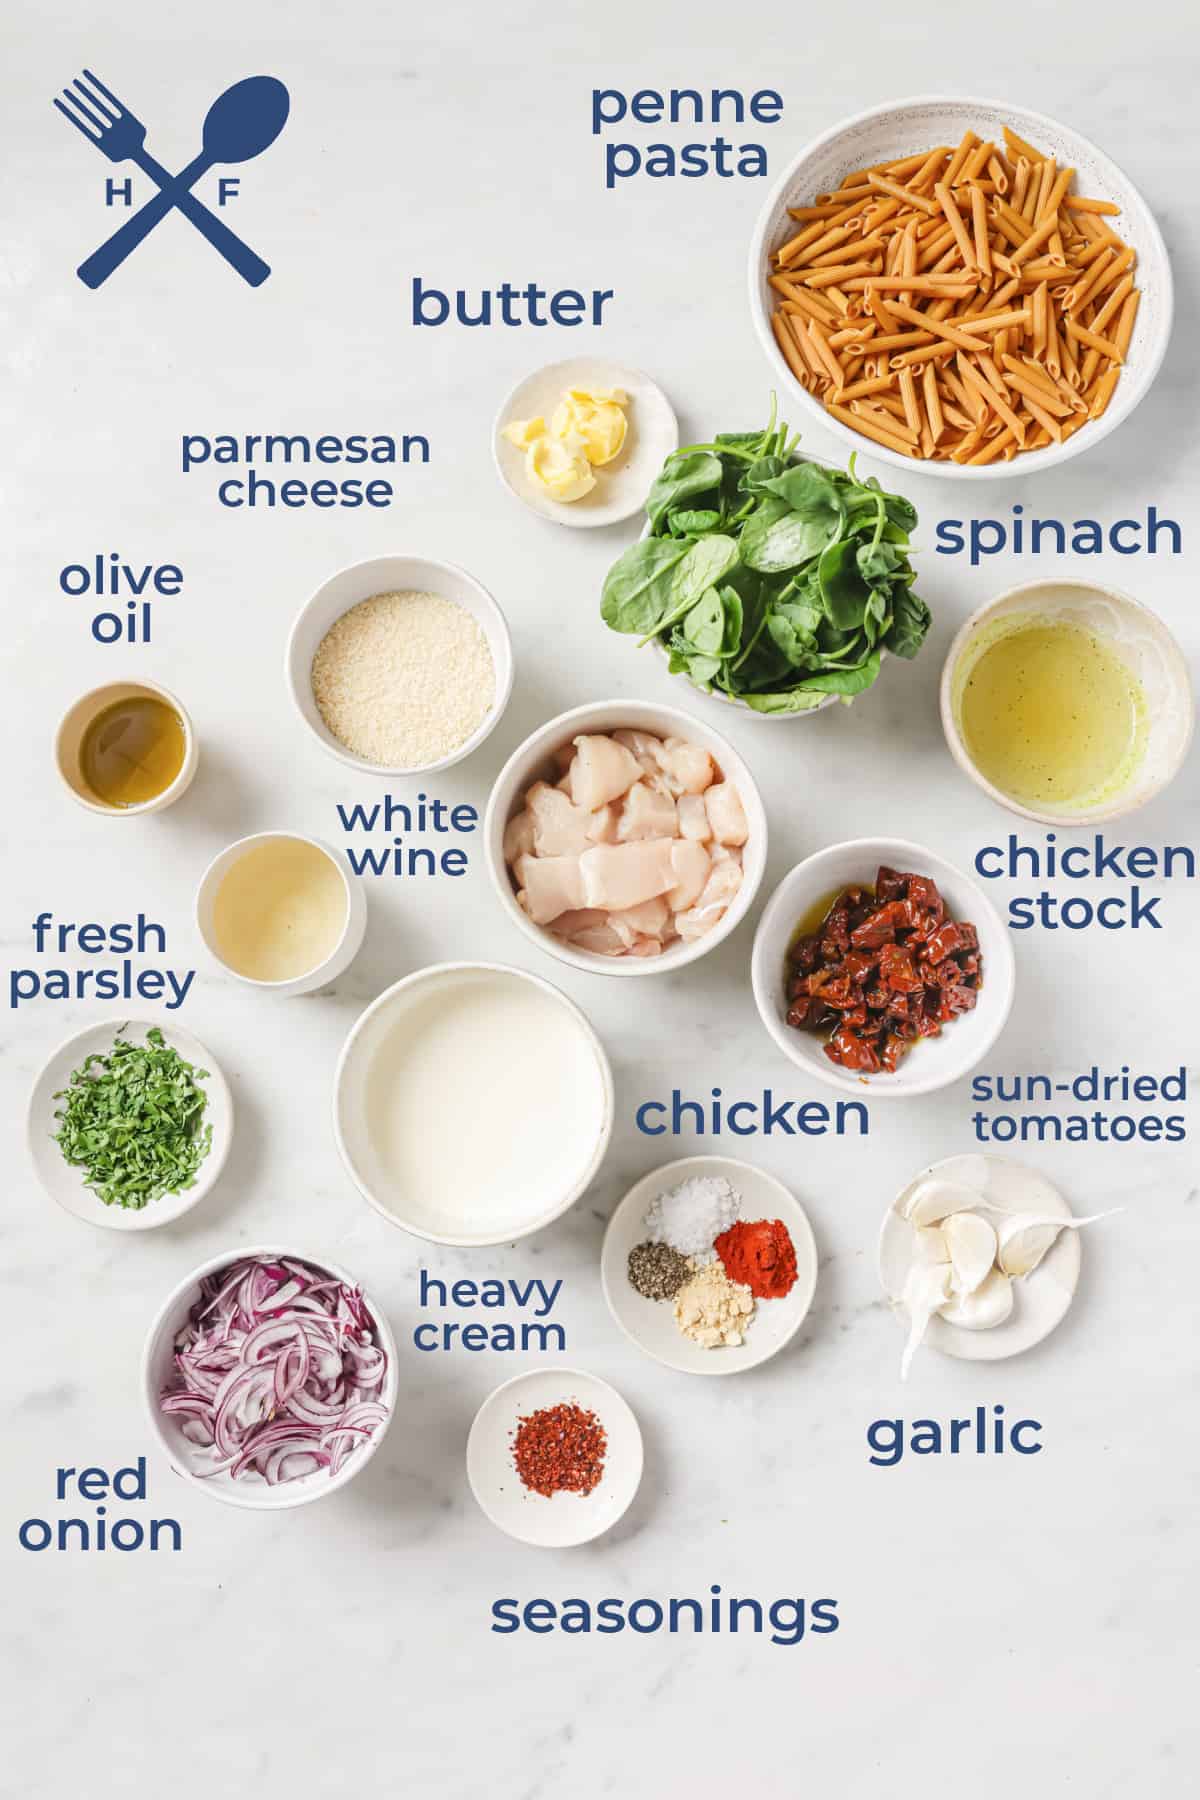 Ingredients all laid out to make a pasta dish - penne, chicken, white wine, spinach, garlic, seasonings, red onions, cream, butter, and olive oil.